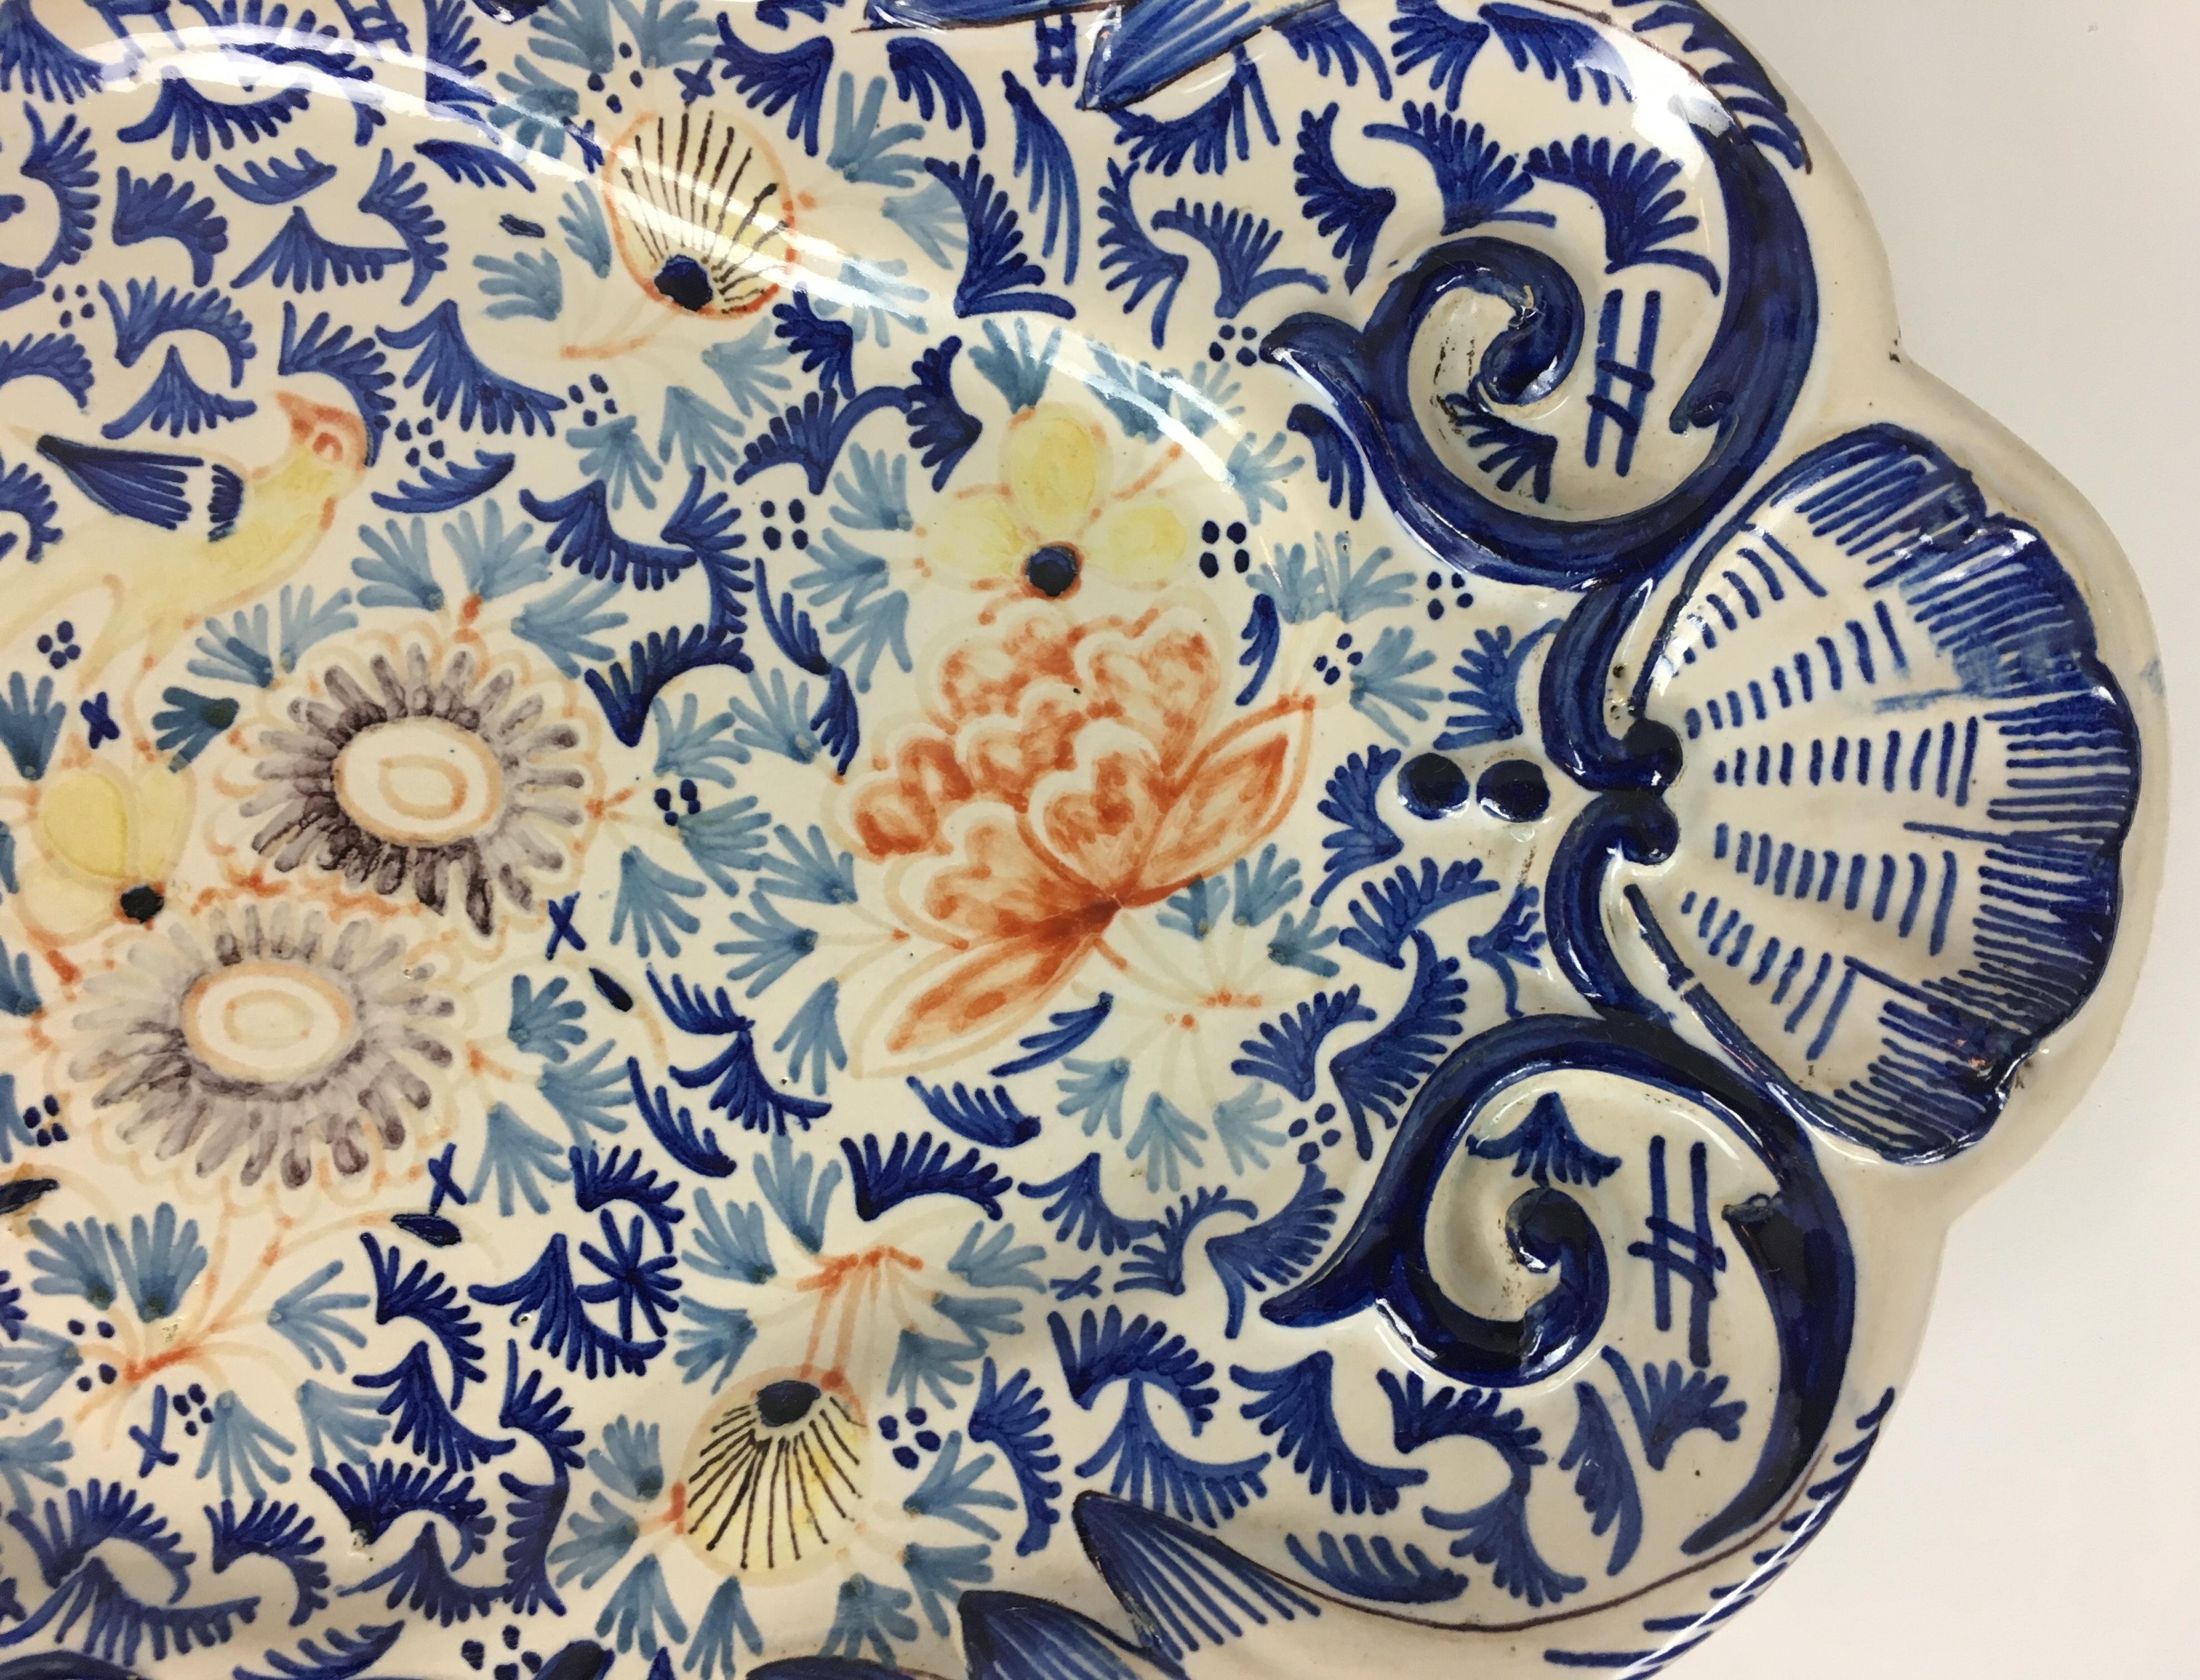 Hand-Painted 19th Century Earthenware Platter from Roeun France